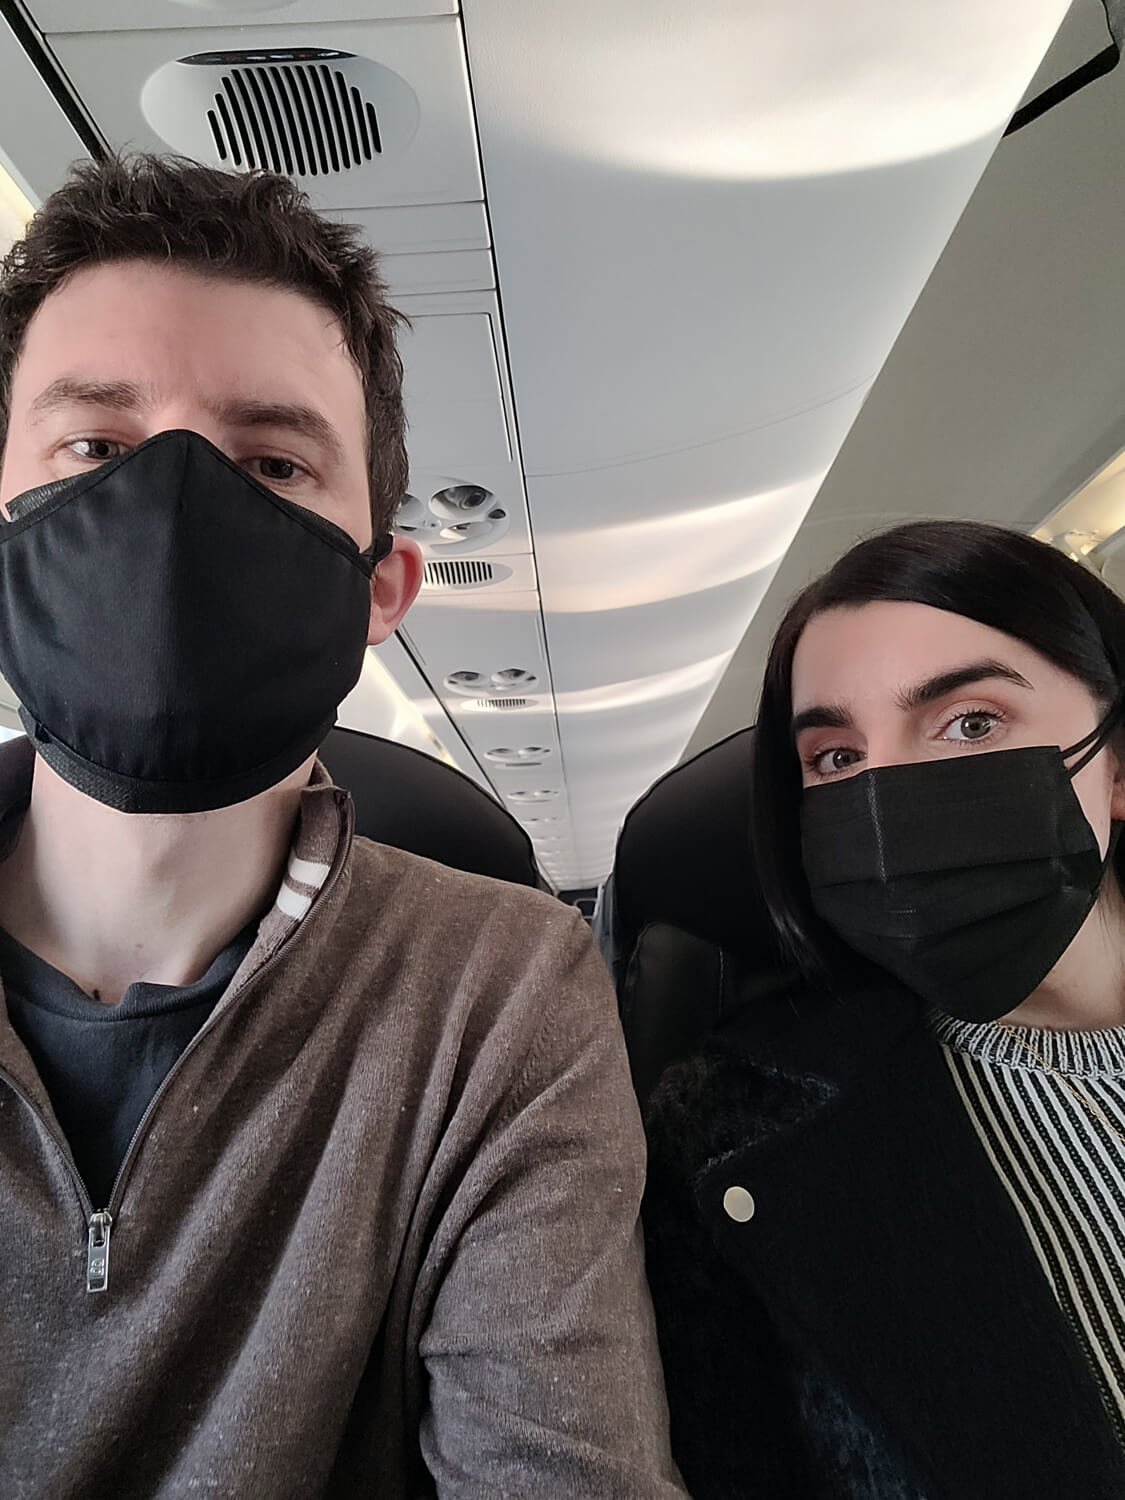 A selfie of Allan and Emma sitting on a plane. They are wearing black face masks.